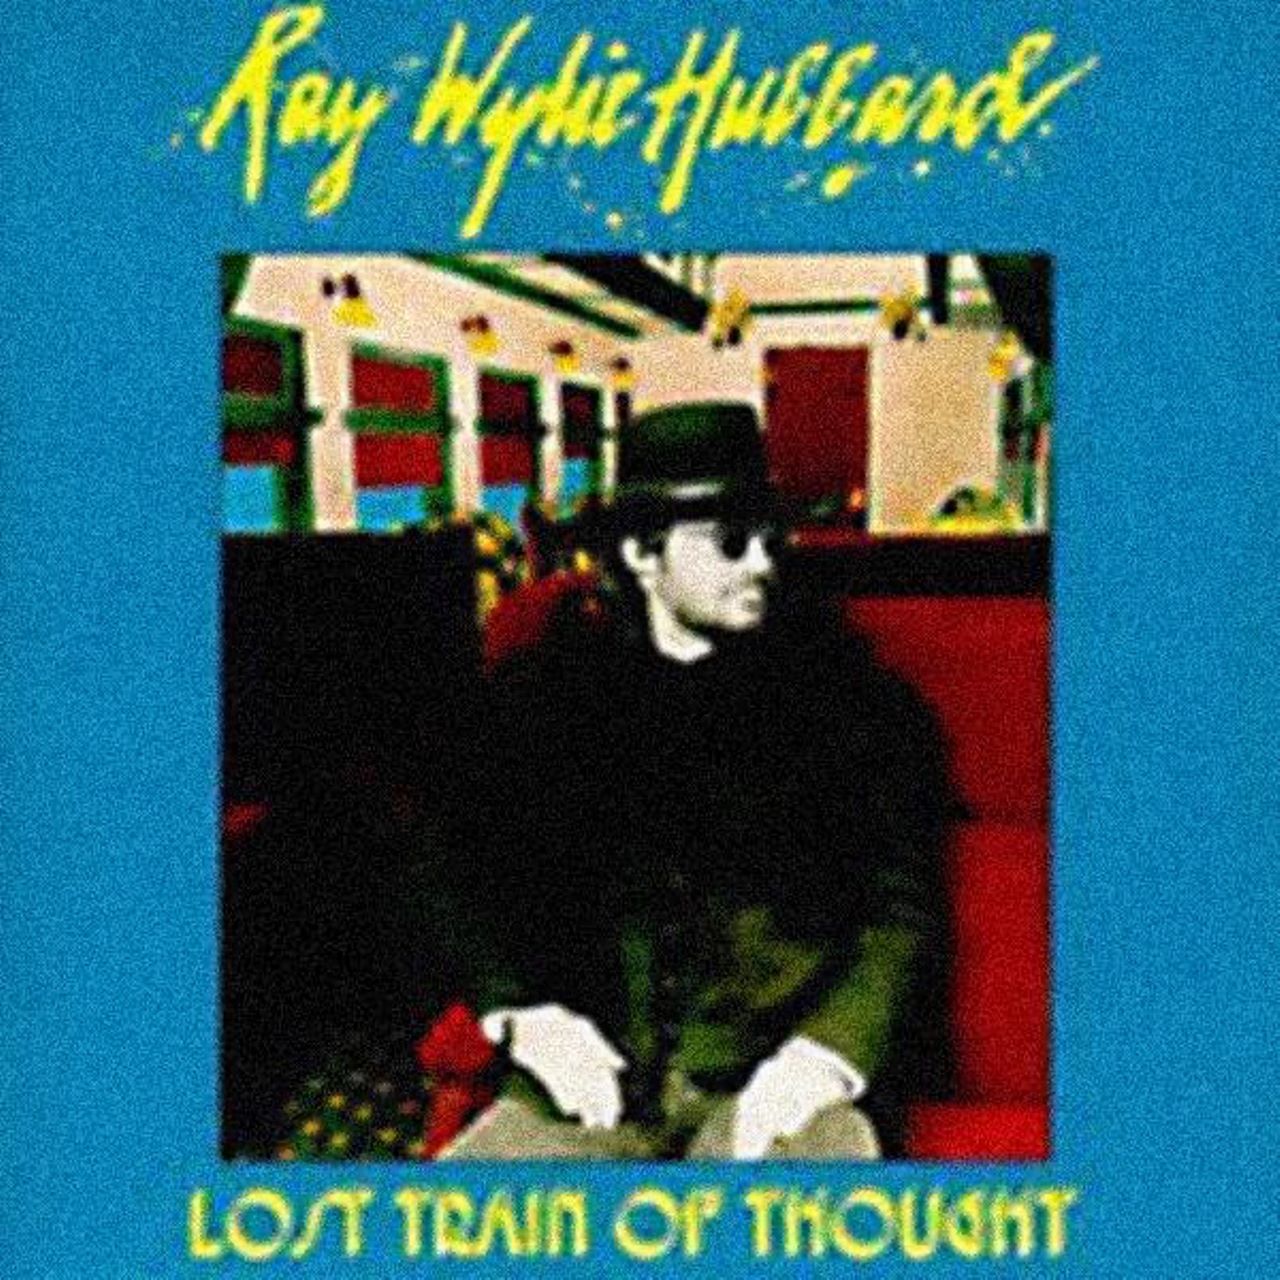 Ray Wylie Hubbard - Lost Train Of Thought cover album